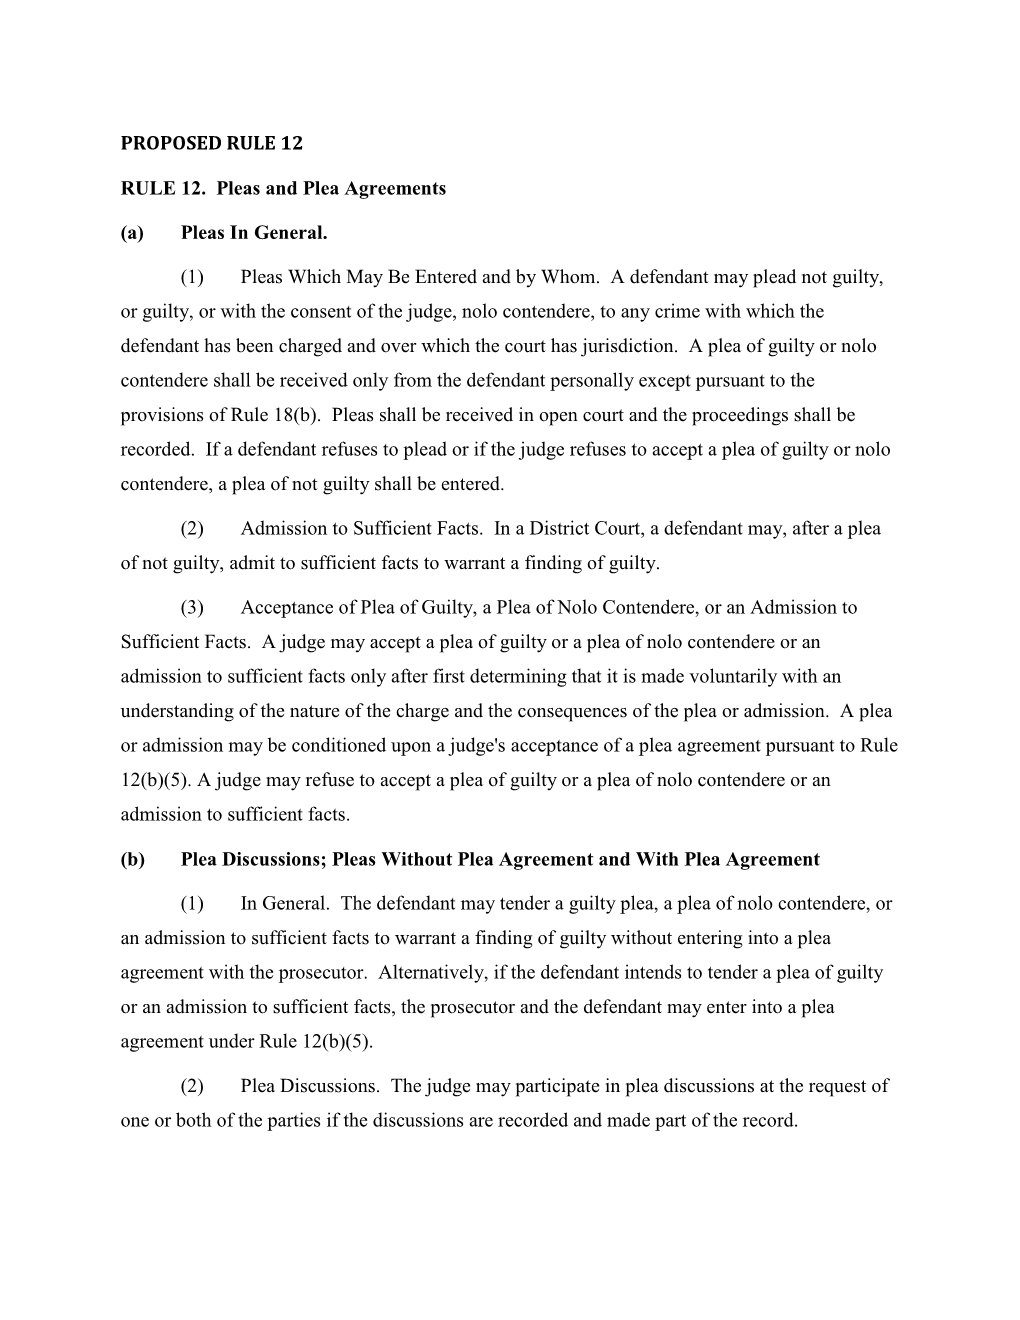 MARKUP of RULES 12(B)-(C) and 29(A) SHOWING PROPOSED AMENDMENTS